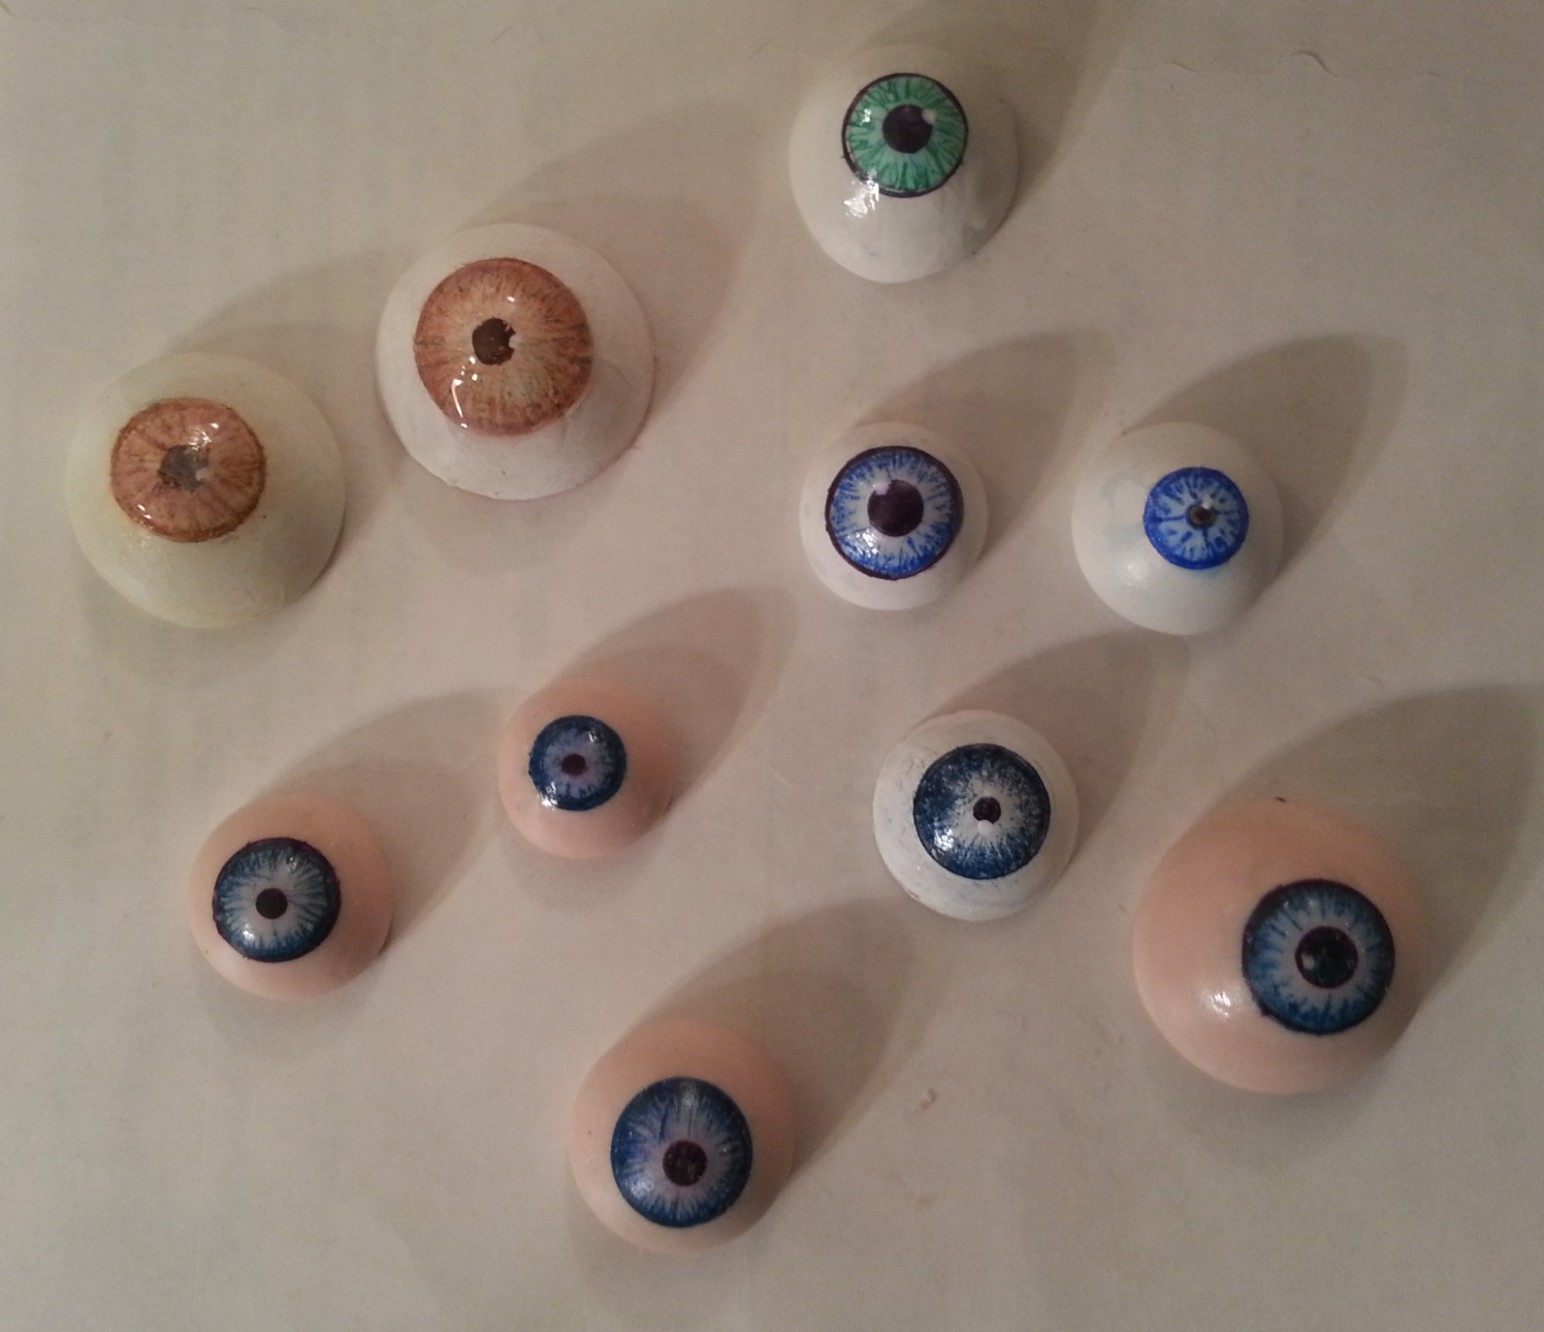 Large Doll Eye Push Mold In Silicone Paint For Air Dry Clay